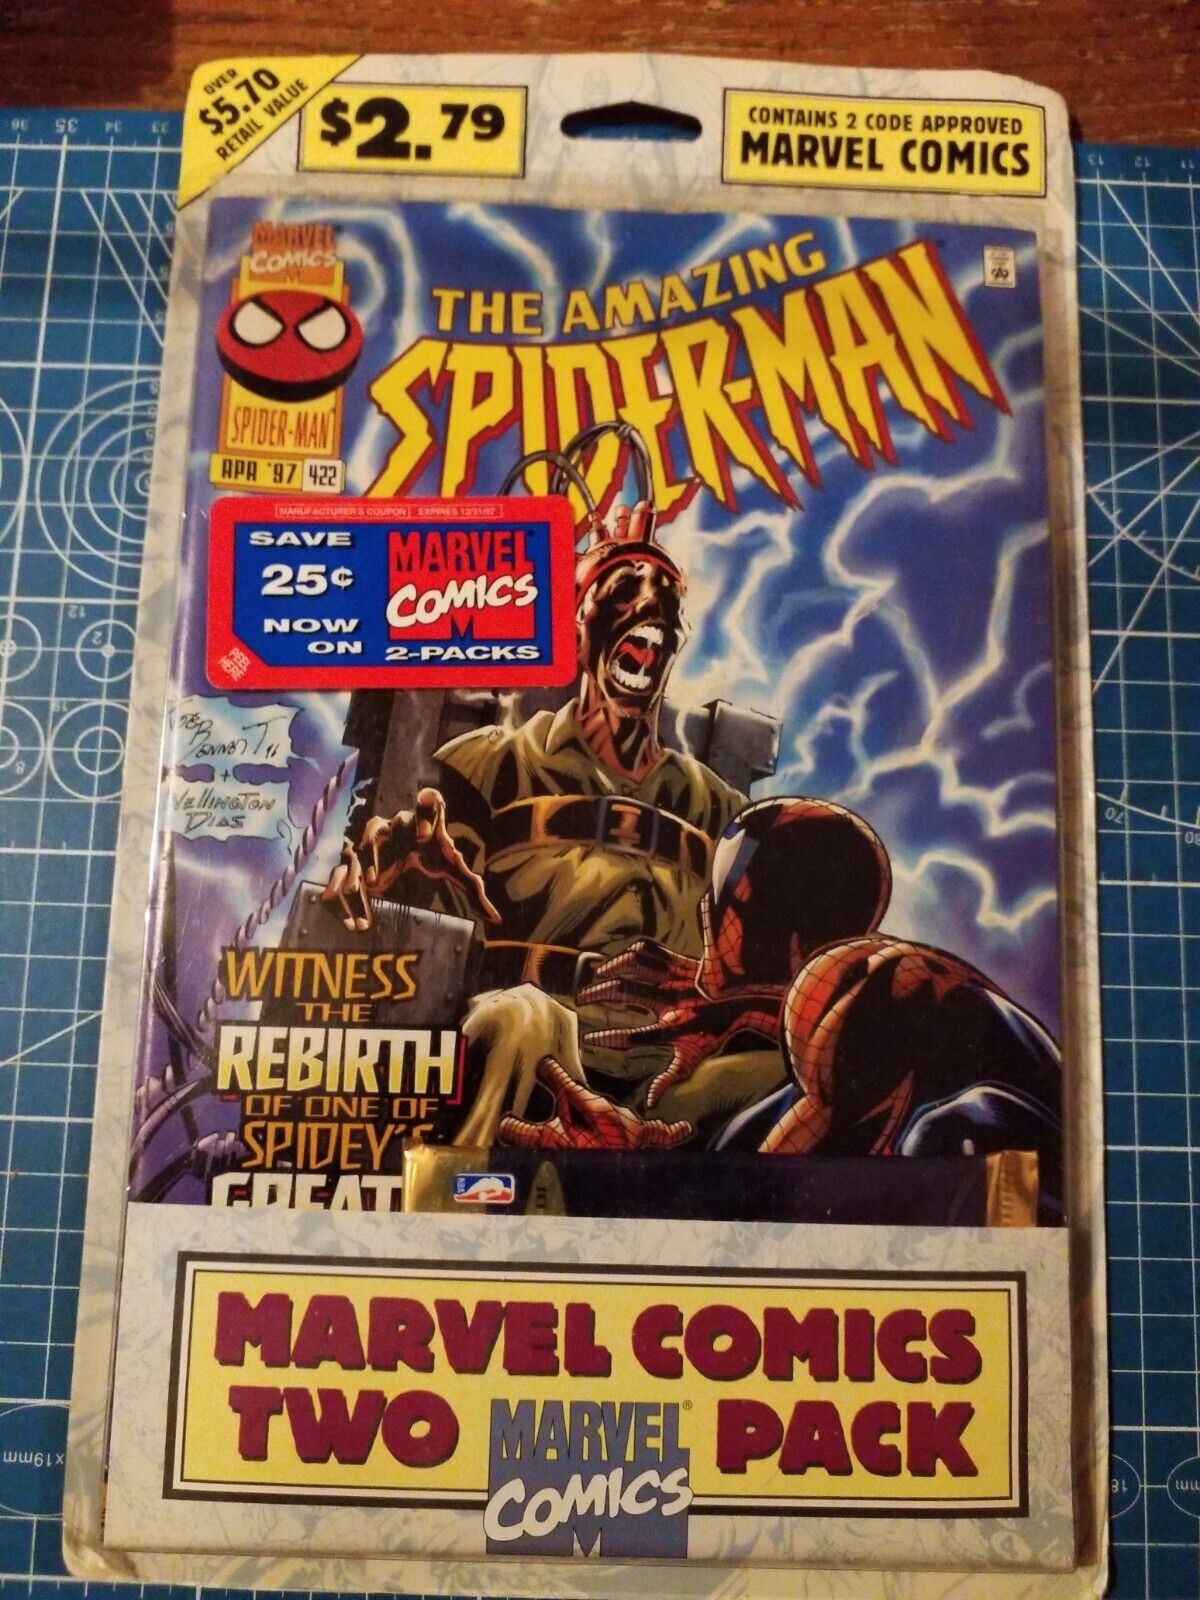 Marvel Comics 2 Pack with 1995 1996 SkyBox Basketball Card Pack